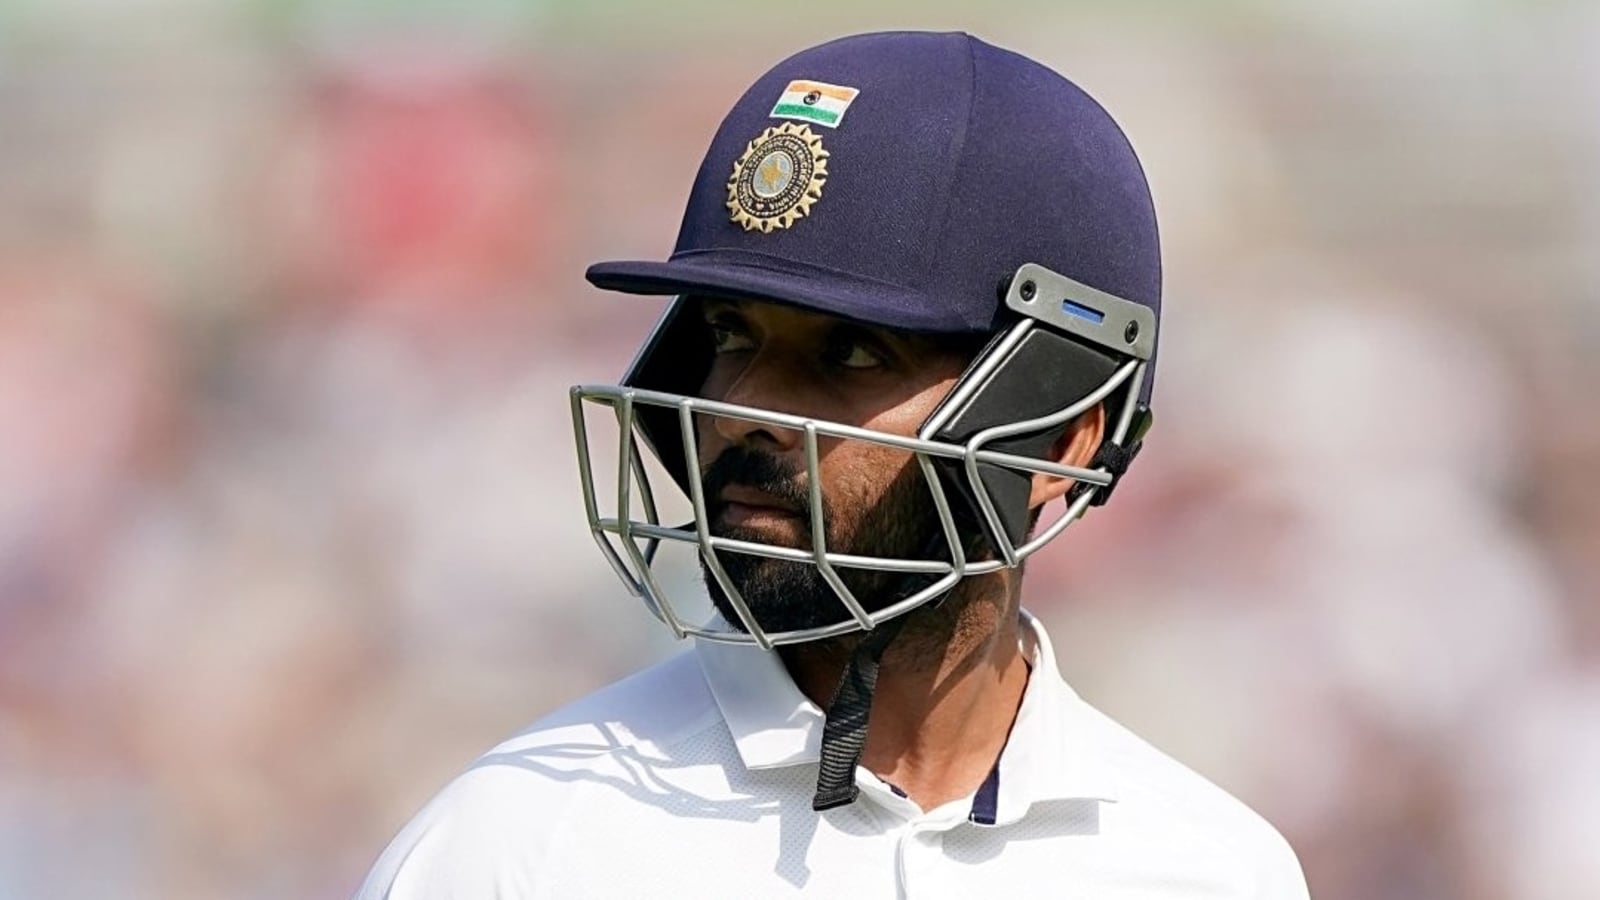 Hindi News: ‘If I was selector he would’ve been out 2 years back’: Ex-IND player on Rahane’s future, claims ‘his shelf life is over’